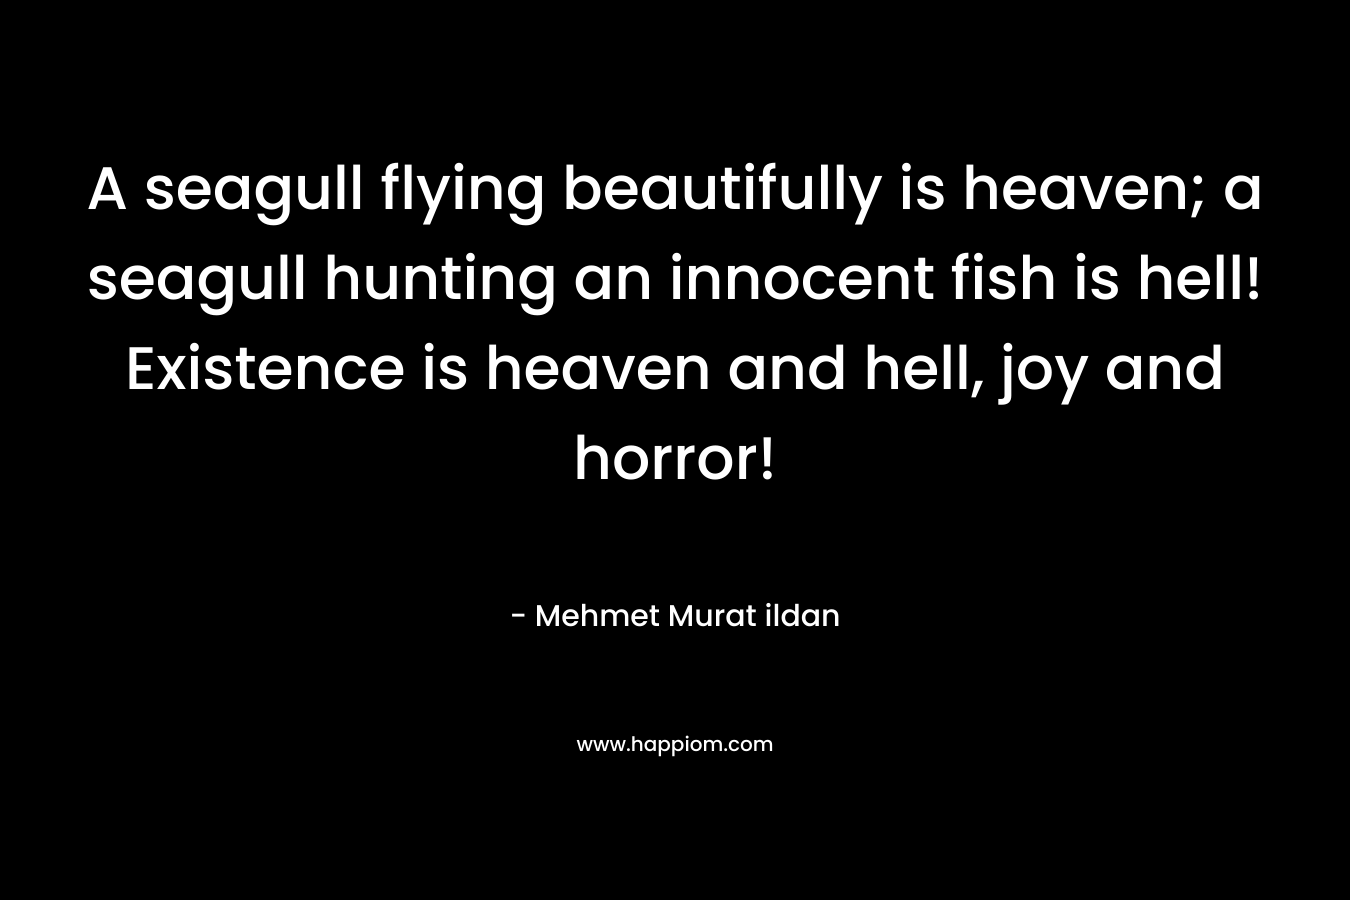 A seagull flying beautifully is heaven; a seagull hunting an innocent fish is hell! Existence is heaven and hell, joy and horror!